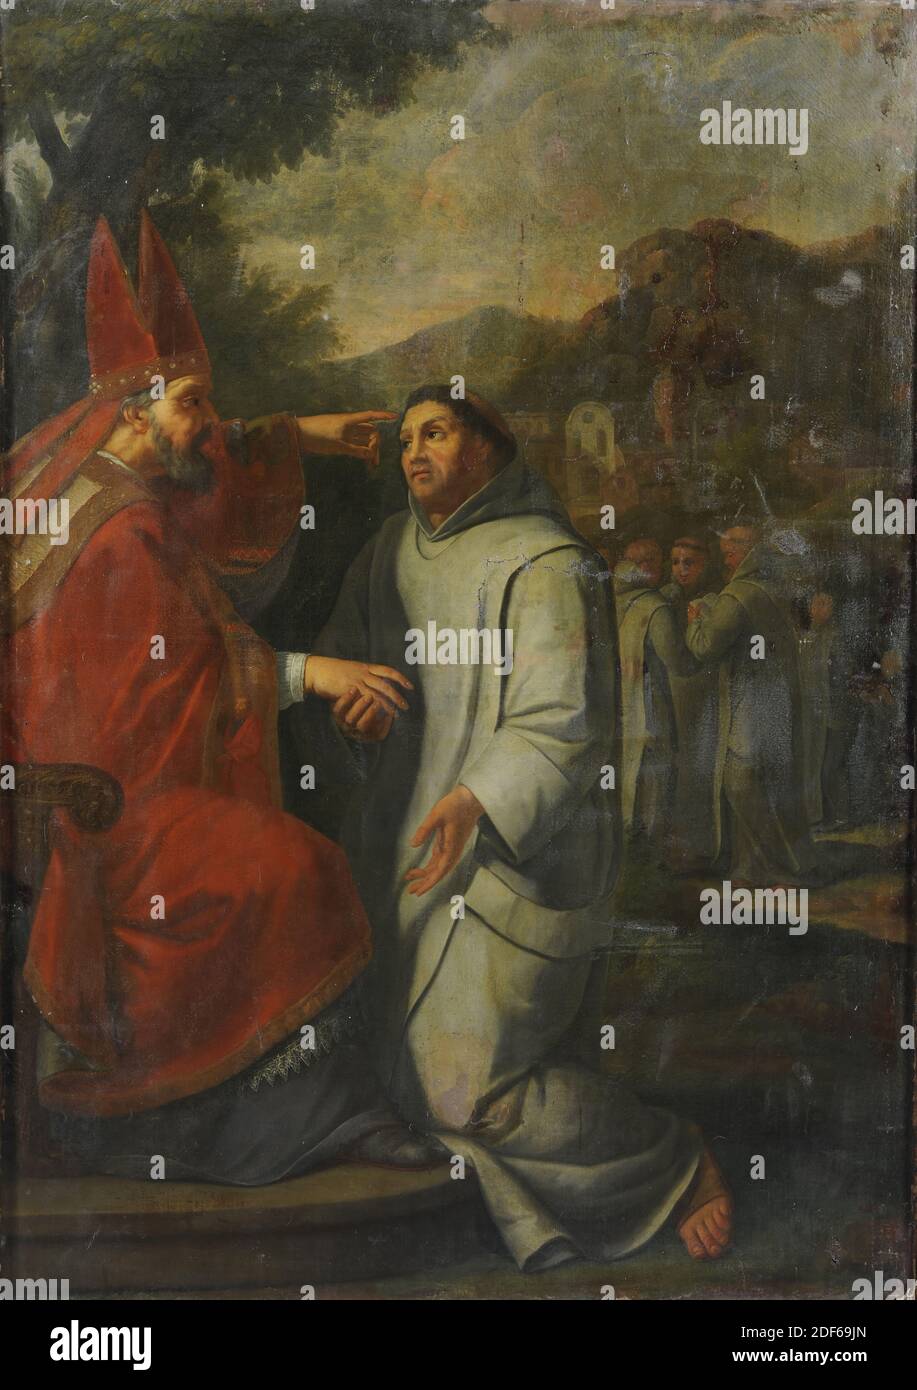 painting, Willem van Ingen, late 17th century, canvas, oil paint, painted, Carrier: 213 x 150.5 x 2.3cm 2130 x 1505 x 23mm, saint, chair, mountain landscape, man, tree, lead, Painting depicting Saints Bruno and Hugo of Grenoble. In a mountain landscape to the left on a throne is Saint Hugo, dressed in a red bishop's robe. He is sitting, fully turned to the right, full-length and wearing a red miter. He reaches the right hand to Saint Bruno kneeling in front of him and with the left hand points in the distance to the monastery buildings of the Chartreuse. Saint Bruno, like the six monks Stock Photo